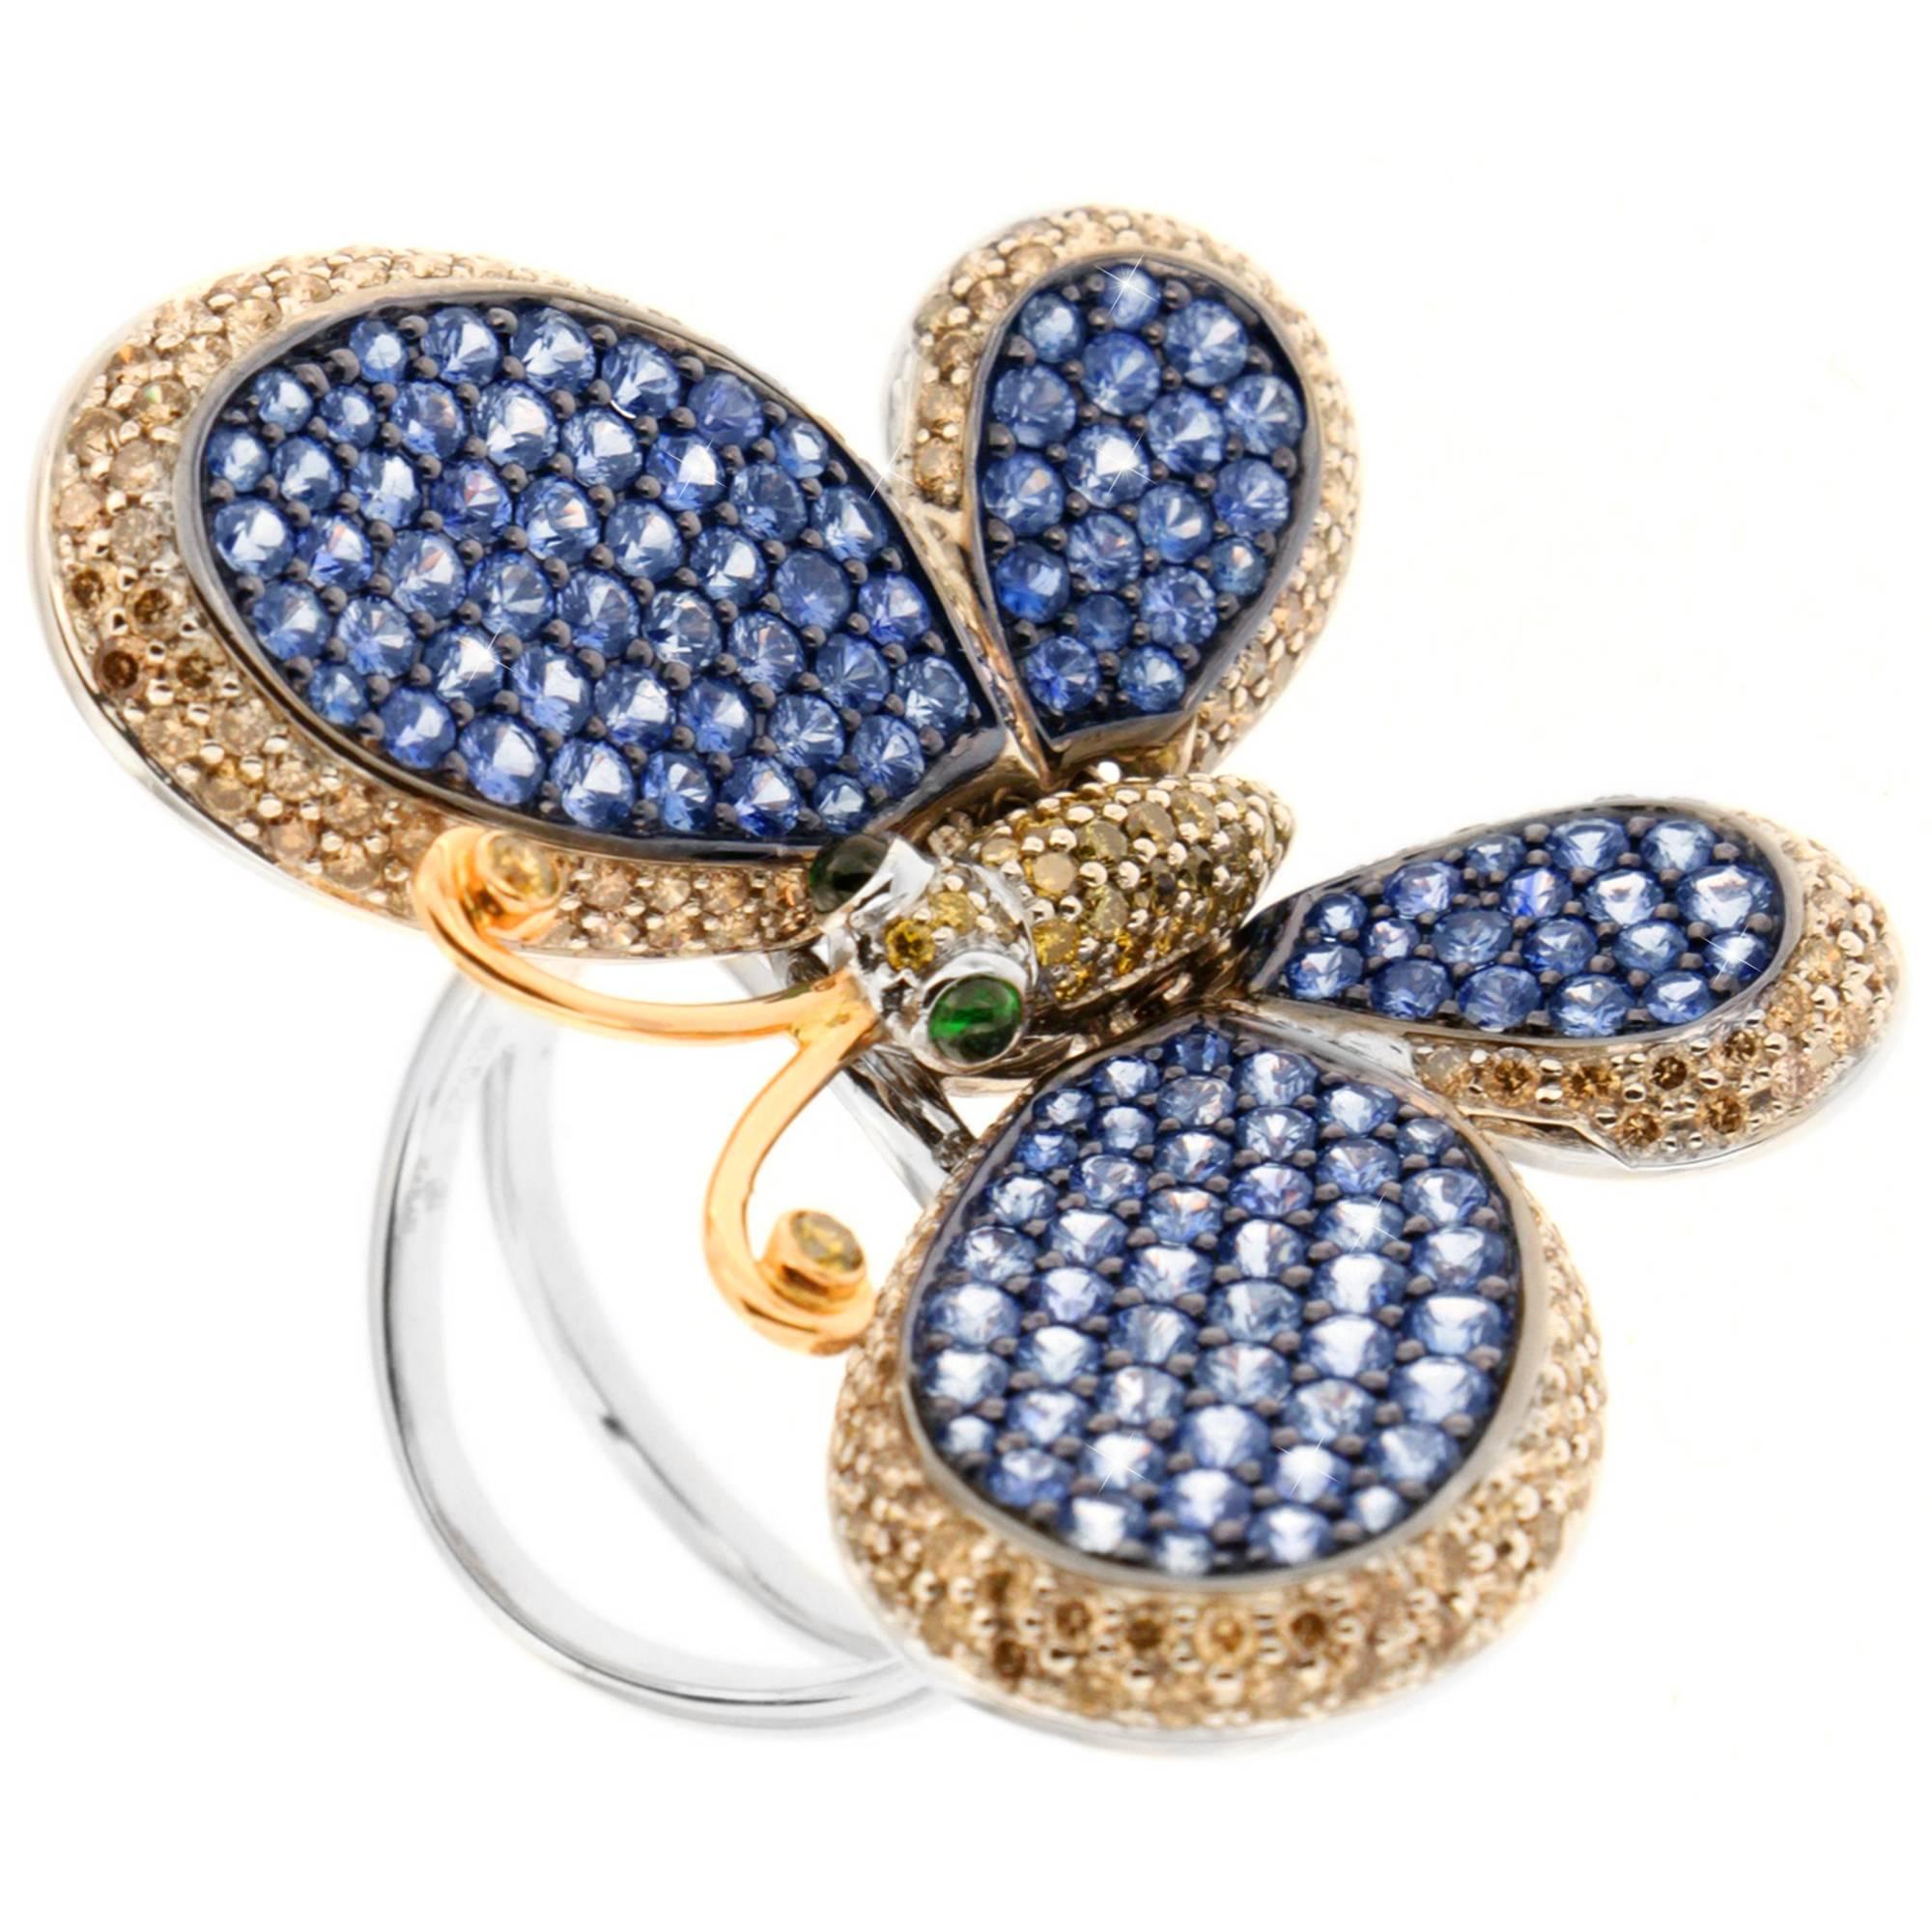 Zorab Creation Blue Sapphire Diamond Butterfly Cocktail Ring